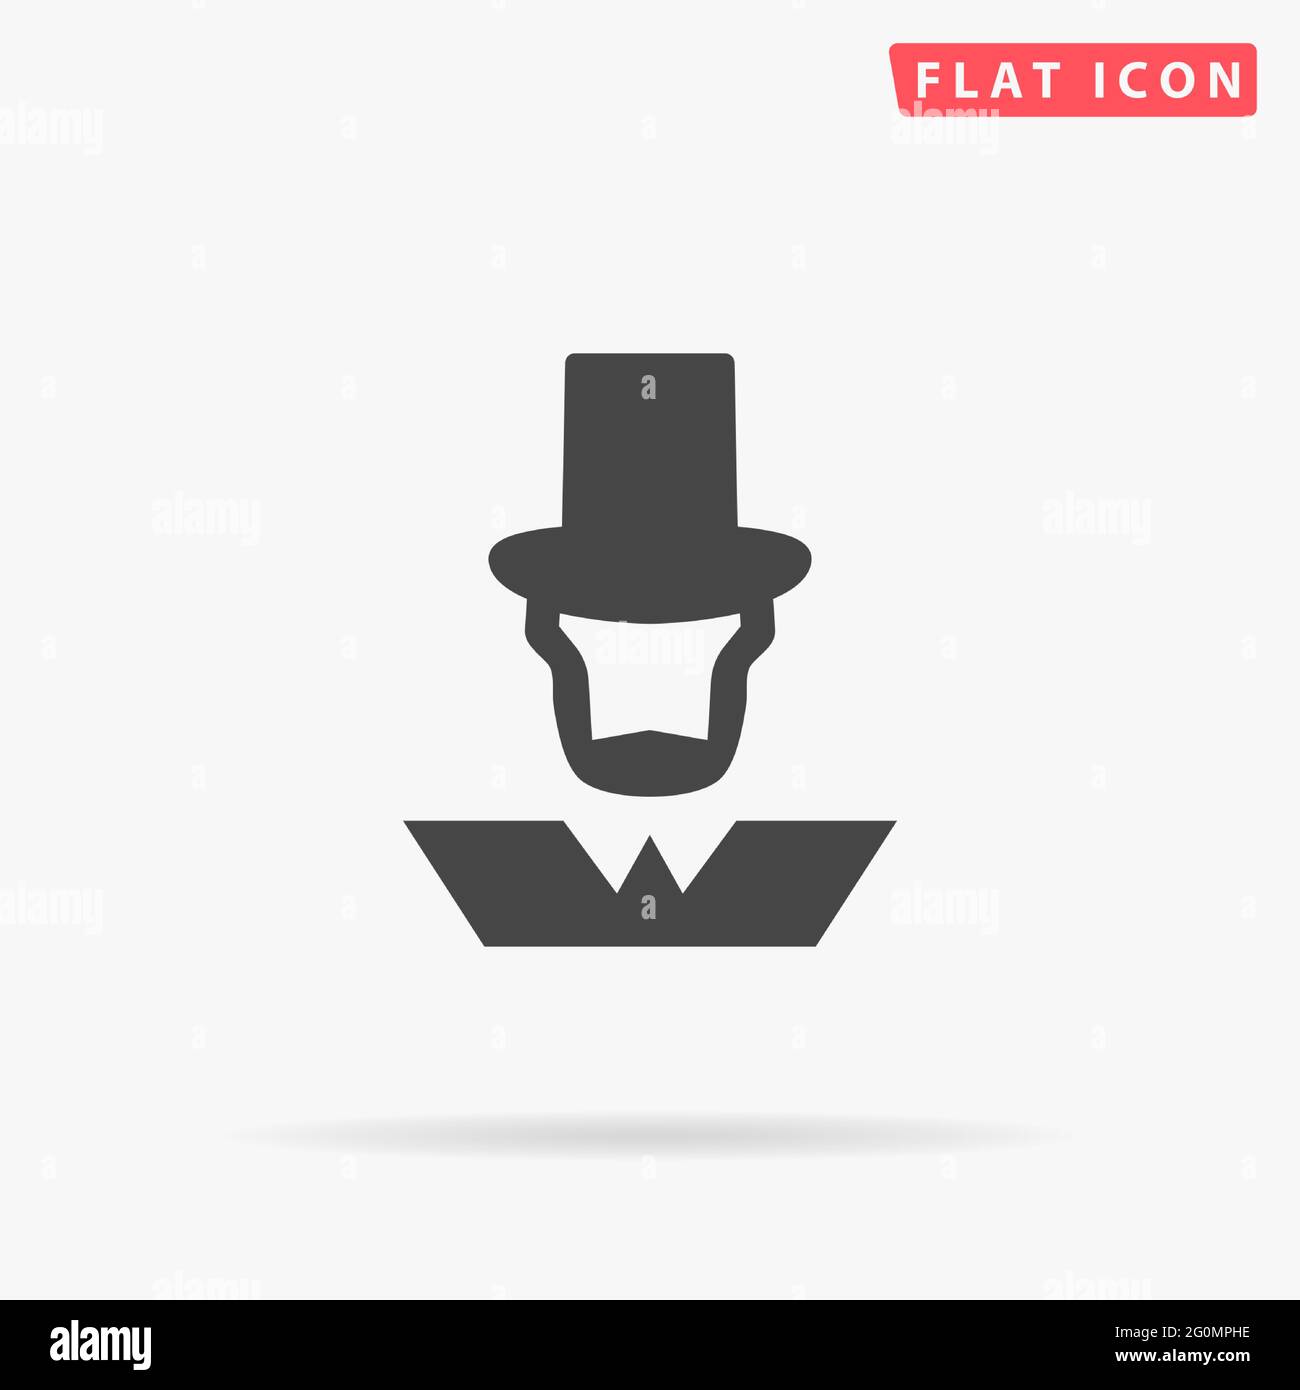 American president Abraham Lincoln flat vector icon. Hand drawn style design illustrations. Stock Vector